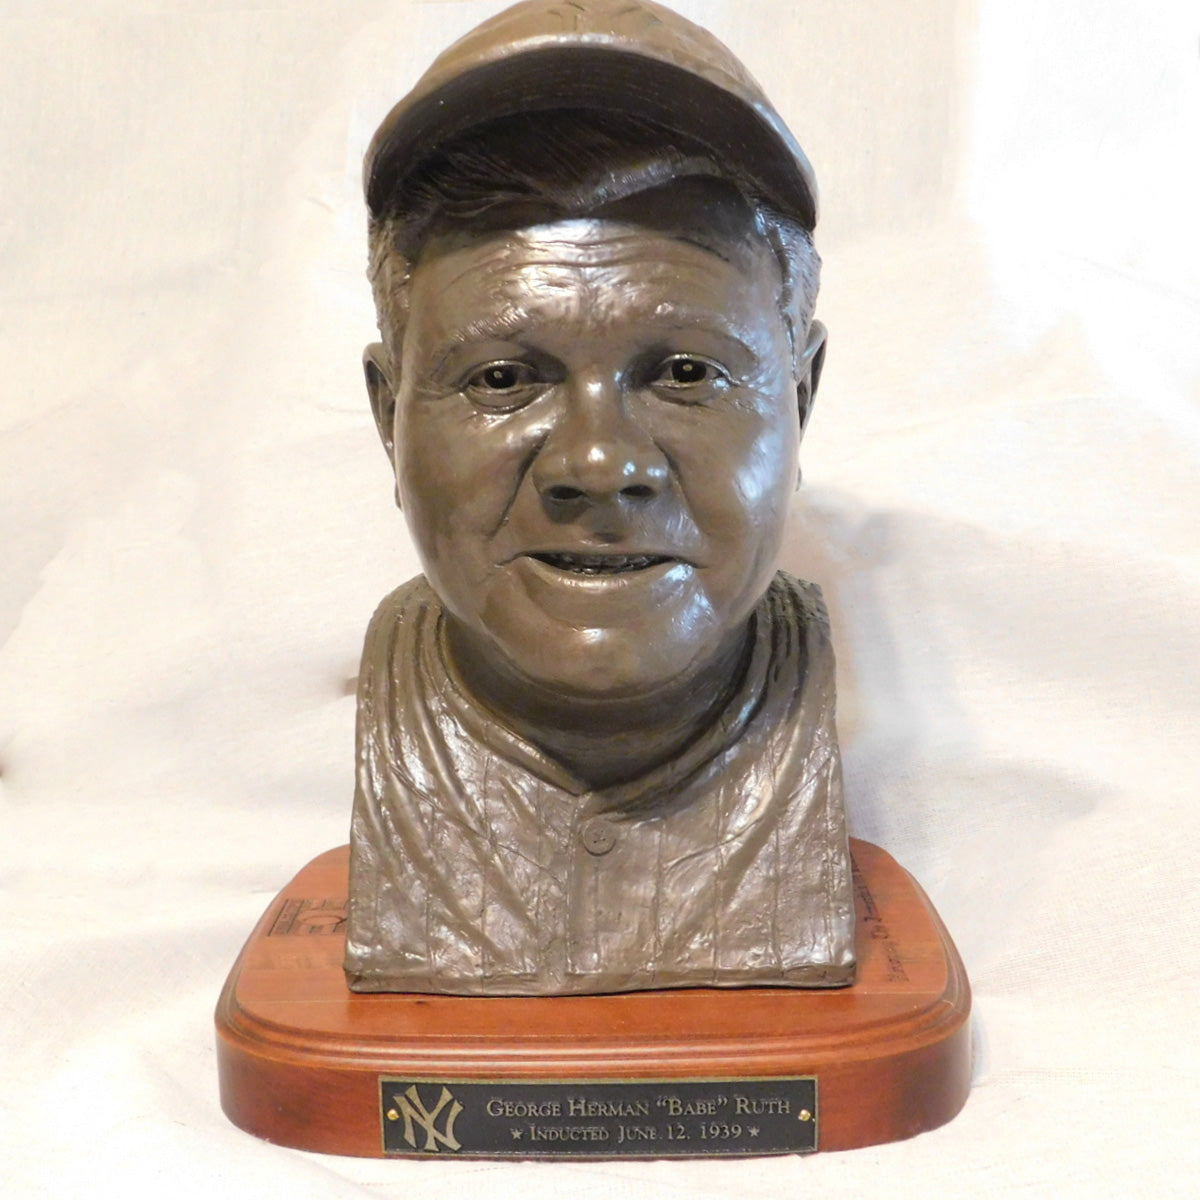 Babe Ruth Statue (Cooperstown, New York), A statue of Babe …